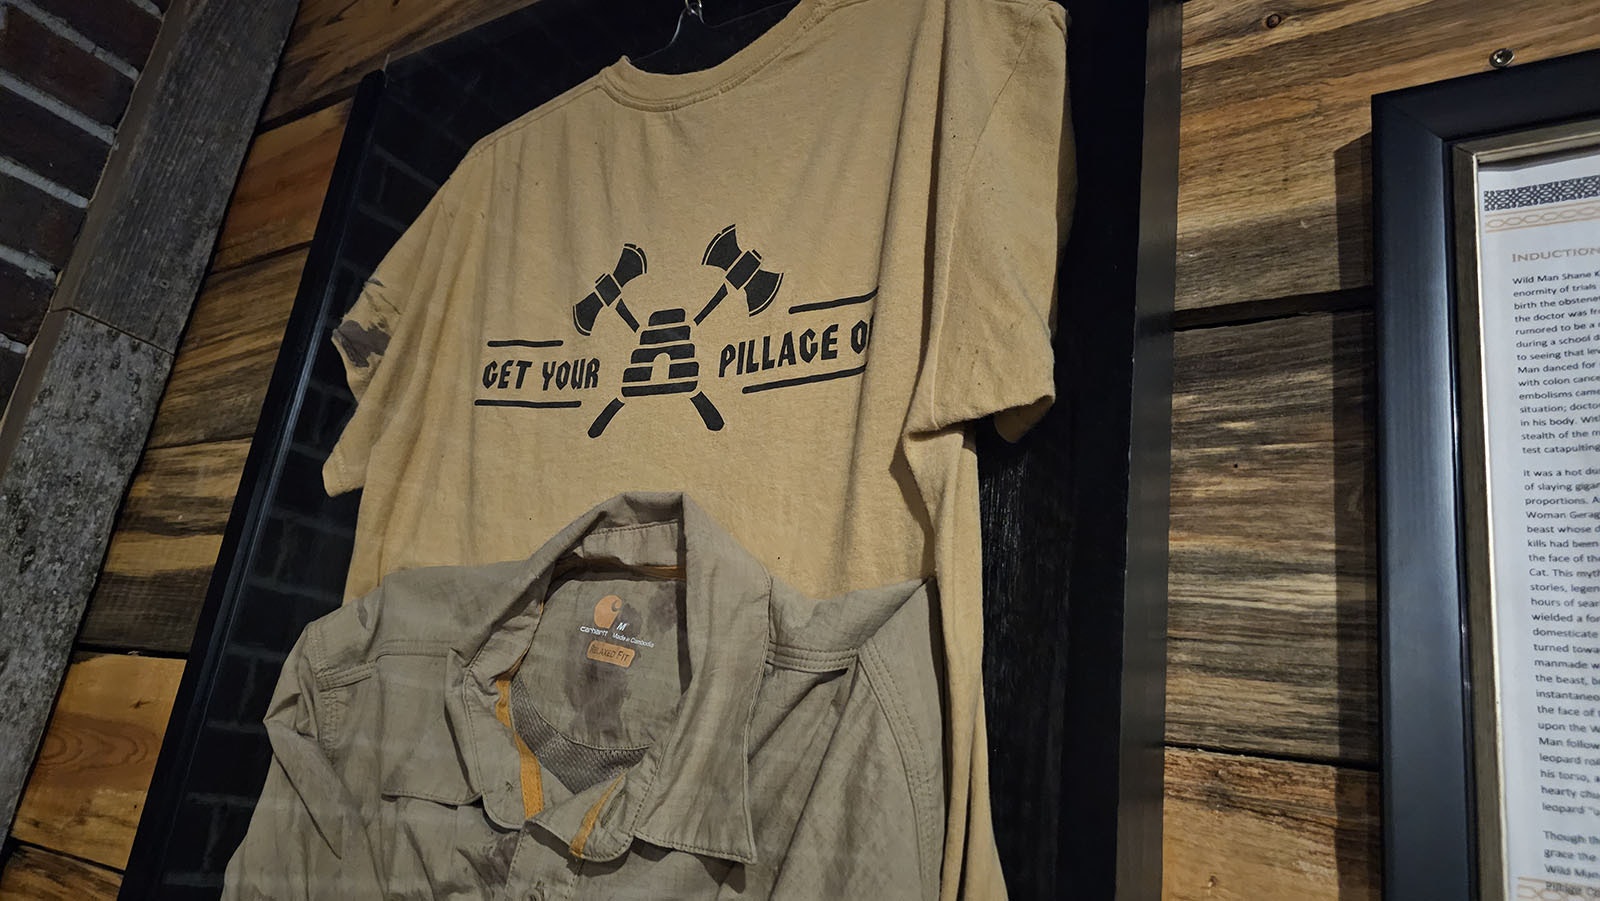 The bloodied Big Lost T-shirts that inspired an inspirational story for the Wild Man mead.